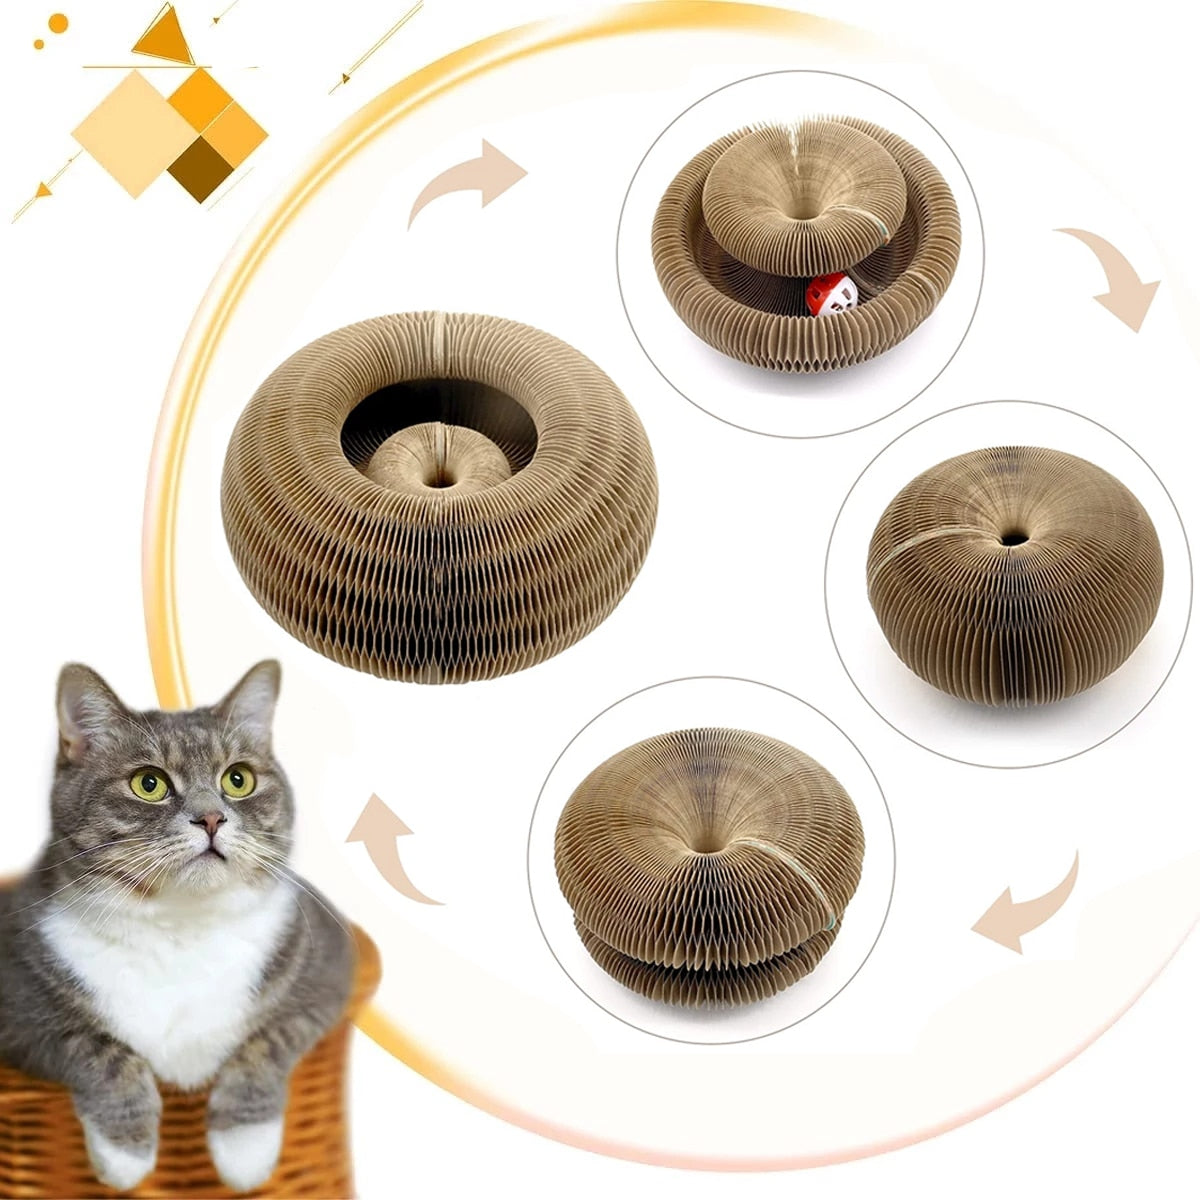 Get The Magic Scratching Cat Toy: Kitty's Delight in 2023